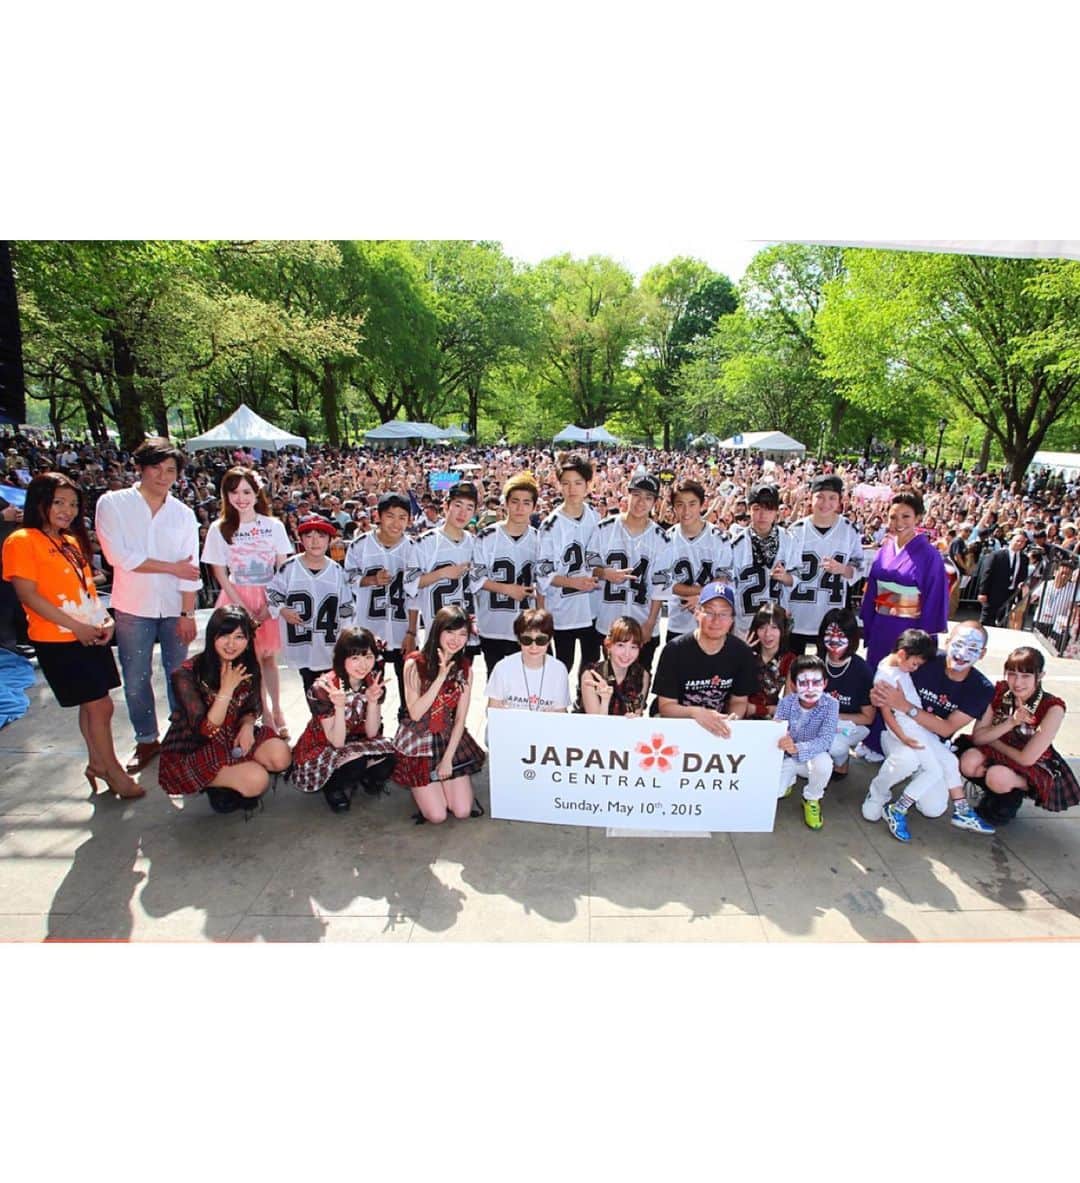 メロディー・モリタさんのインスタグラム写真 - (メロディー・モリタInstagram)「Excited to be a part of JAPAN DAY as their charity ambassador this coming Sunday (5/12)!😊🙌🇺🇸🇯🇵 I had the honor of being their Sakura Ambassador four years ago, which was also the year AKB48 came all the way from Japan.🌸 We (including all performers and visitors) danced to their global hit song “Koi Suru Fortune Cookie" all together, and I remember it just like yesterday.☺️ Swipe for pics! This will be the 13th annual JAPAN DAY @centralparknyc, and as usual, there will be tons of booths where you can experience all kinds of Japanese culture, indulge in Japanese soul food for *free*, dances inspired by the 2020 Olympics and more!✨ There will also be JAPAN NIGHT where top artists such as MISIA, PUFFY AMIYUMI, HYDE, and Wagakki Band will be performing at their respective venues.🎤🎶 If you live in/near the NYC area, definitely come join the fun! If you see me around, please say hi!! I would love to meet you all🤗 Hope to see you there!💖 * 毎年約5万人がニューヨークのセントラルパークに集う、アメリカ最大の日米交流イベント「JAPAN DAY @ Central Park」🇺🇸🇯🇵✨ 13回目となる今年は5月12日（日）に開催され、私はチャリティアンバサダーとして参加させていただきます！😊 * 4年前に桜アンバサダーを務めさせて頂いた時には日本からAKB48のメンバーも来られ、「恋するフォーチュンクッキー」を会場の皆さんと踊った光景を昨日の事の様に思い出します。 * 今回も毎年恒例の様々な日本文化が楽しめるブース、無料の日本のソウルフードはもちろん、オリンピックをテーマにした音頭やスペシャルゲストも登場します🙌 * 「JAPAN NIGHT」にはMISIAさん、PUFFY AMIYUMIさん、HYDEさん、和楽器バンドさんなど、豪華ラインアップでのライブもそれぞれの会場で開催されます。 * ニューヨーク、又はニューヨーク近郊にお住いの皆さん、日本を感じられる素敵な1日を思いっきり楽しみましょう‼️😆 そして、もしも私を見かけましたら是非お声をかけてくださいね！☺️🎀 #NY #JAPANDAY #charity #AKB48」5月9日 6時17分 - melodeemorita